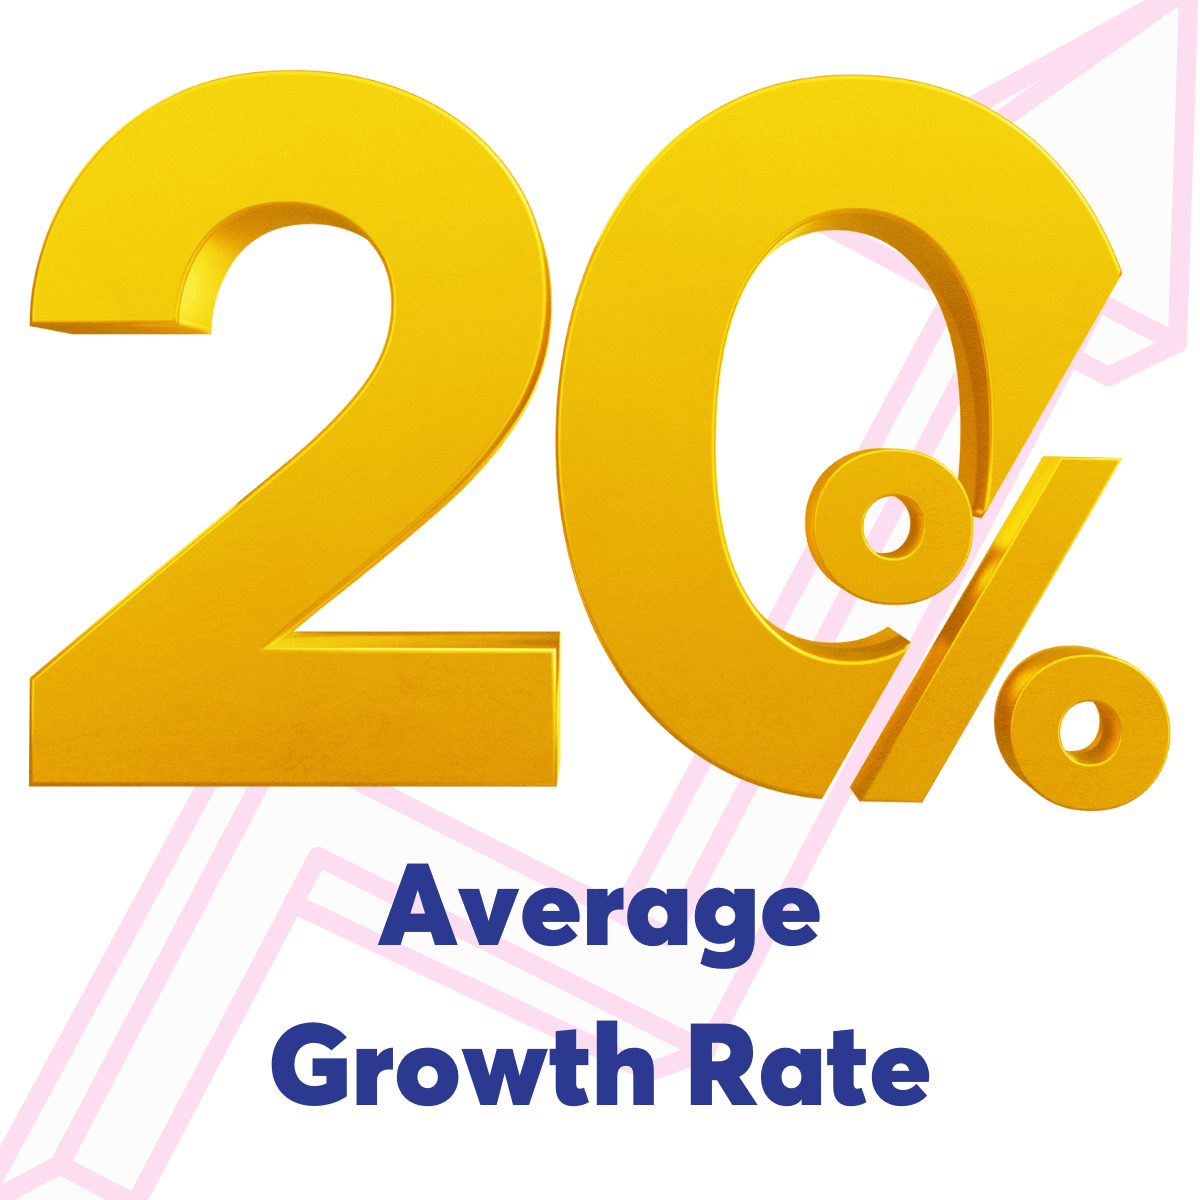 20% Average Growth rate